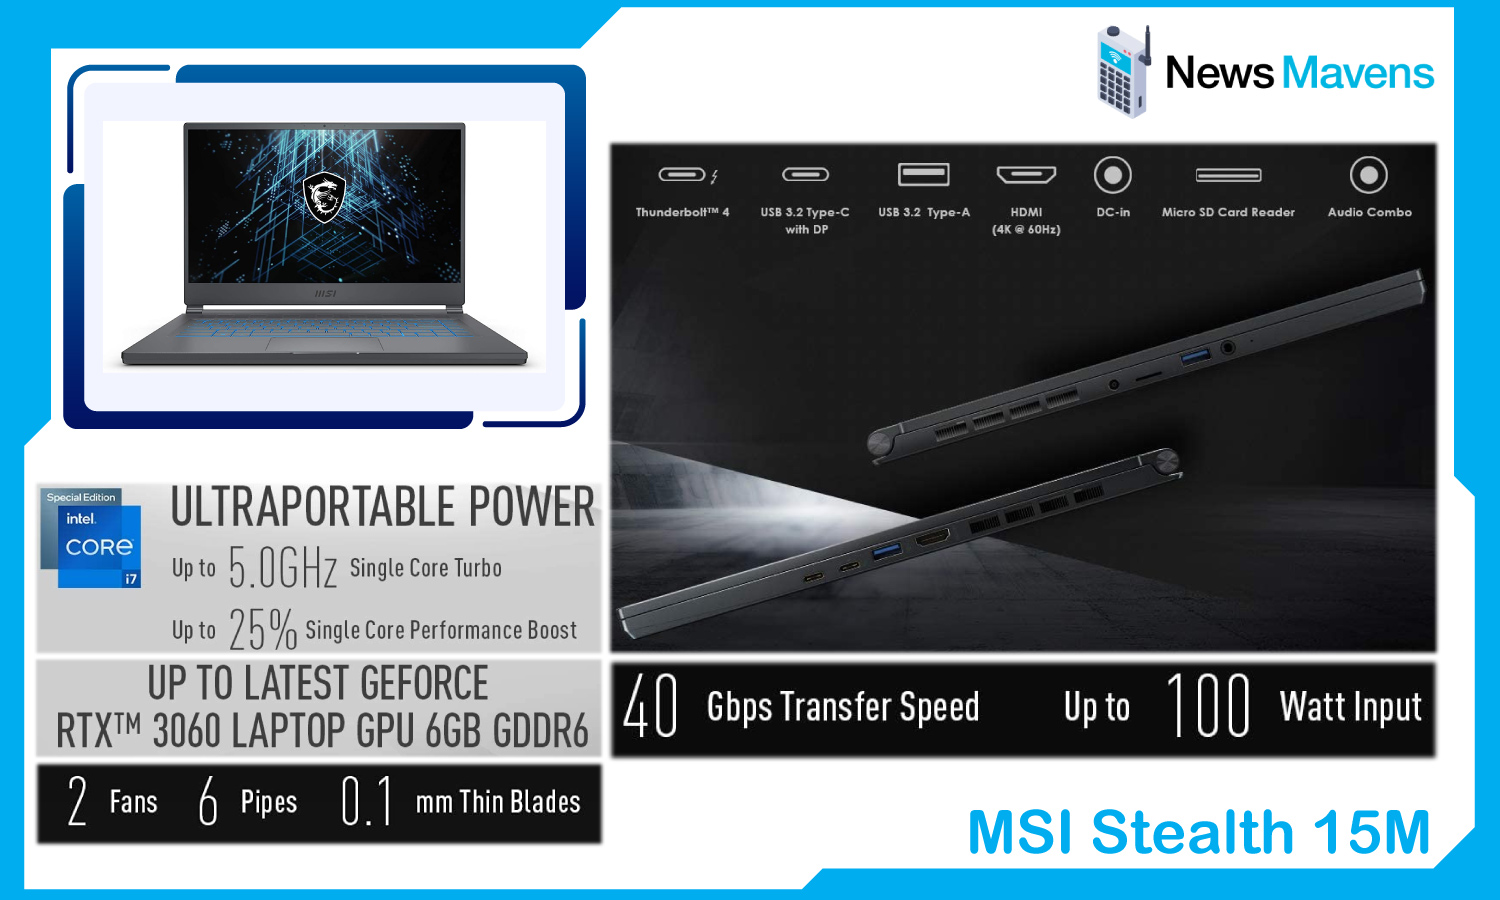 MSI Stealth 15M Laptop With Backlit Keyboard